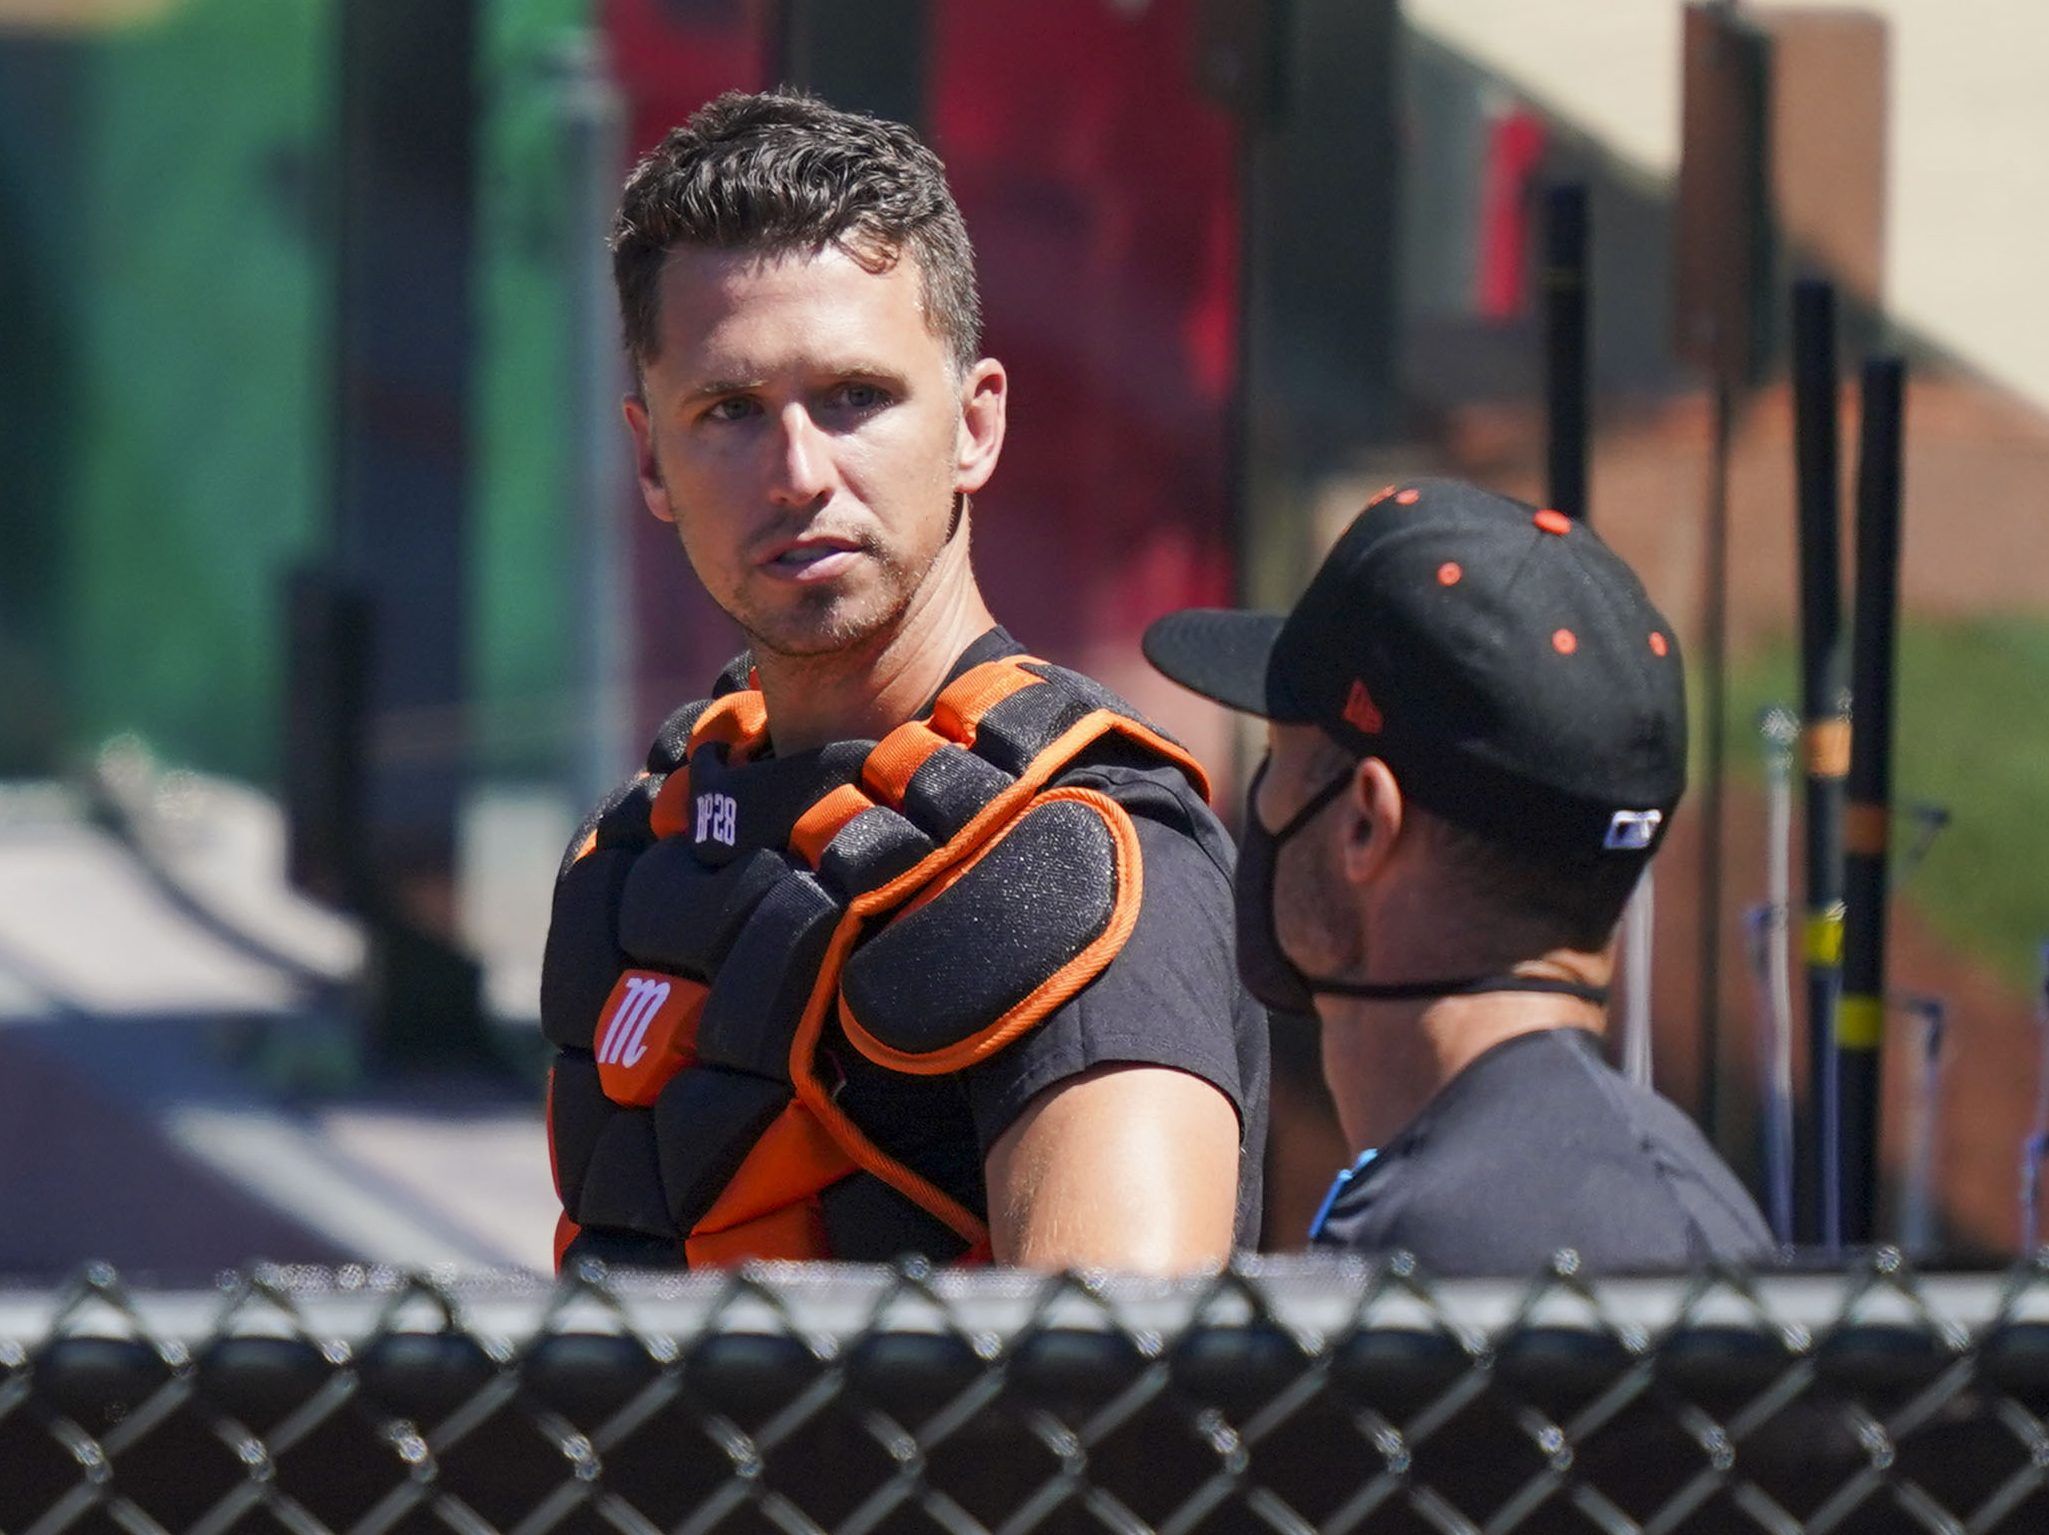 Giants' Buster Posey opts out of 2020 season